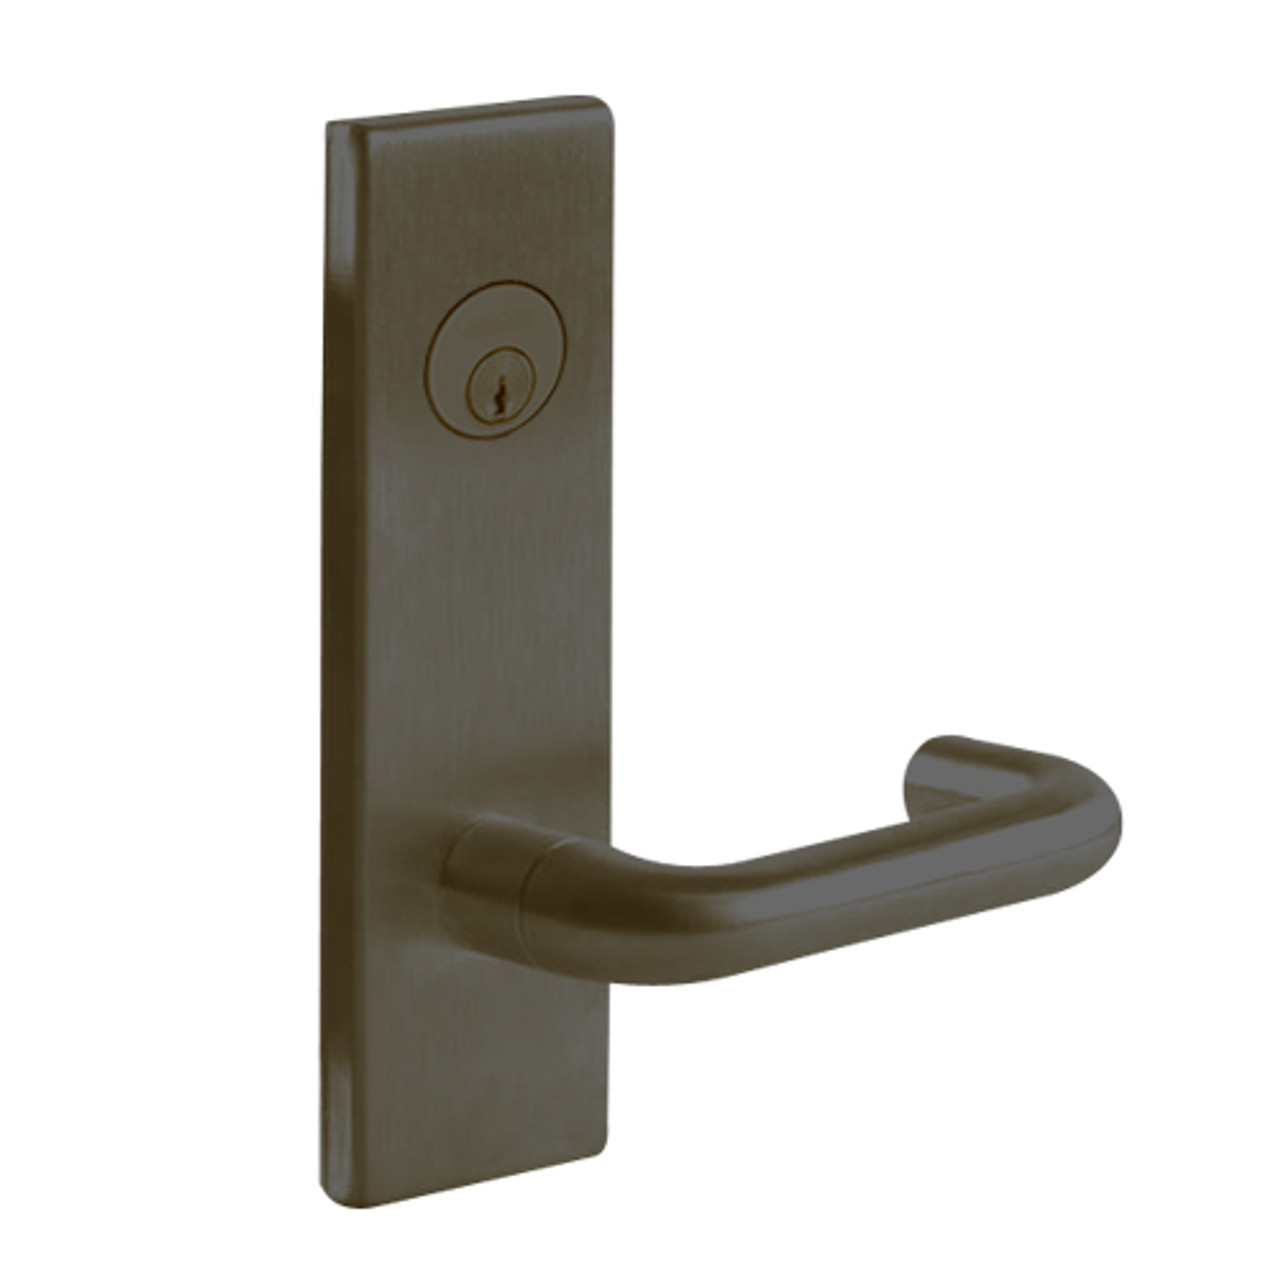 L9456L-03N-613 Schlage L Series Less Cylinder Corridor with Deadbolt Commercial Mortise Lock with 03 Cast Lever Design in Oil Rubbed Bronze